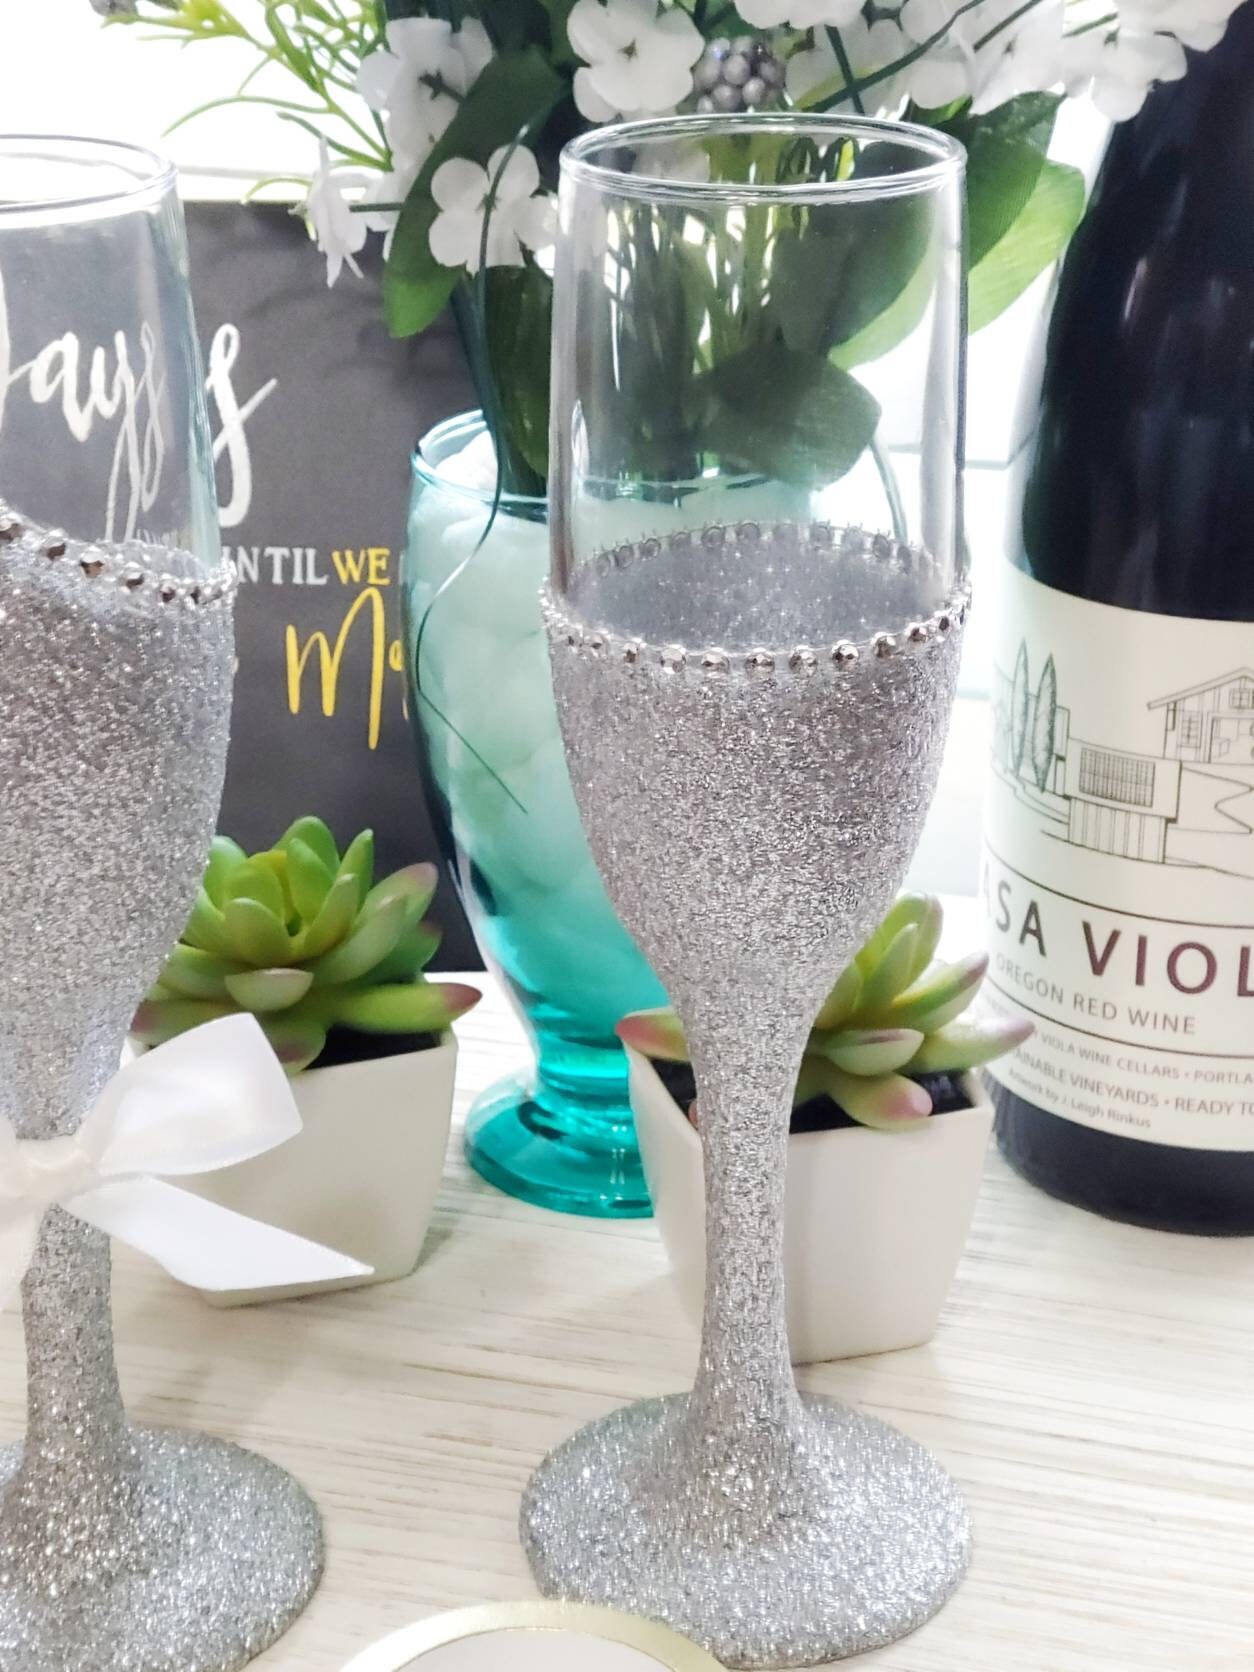 Bride & Groom Stainless Steel Champagne Tumblers – Hope Yoder